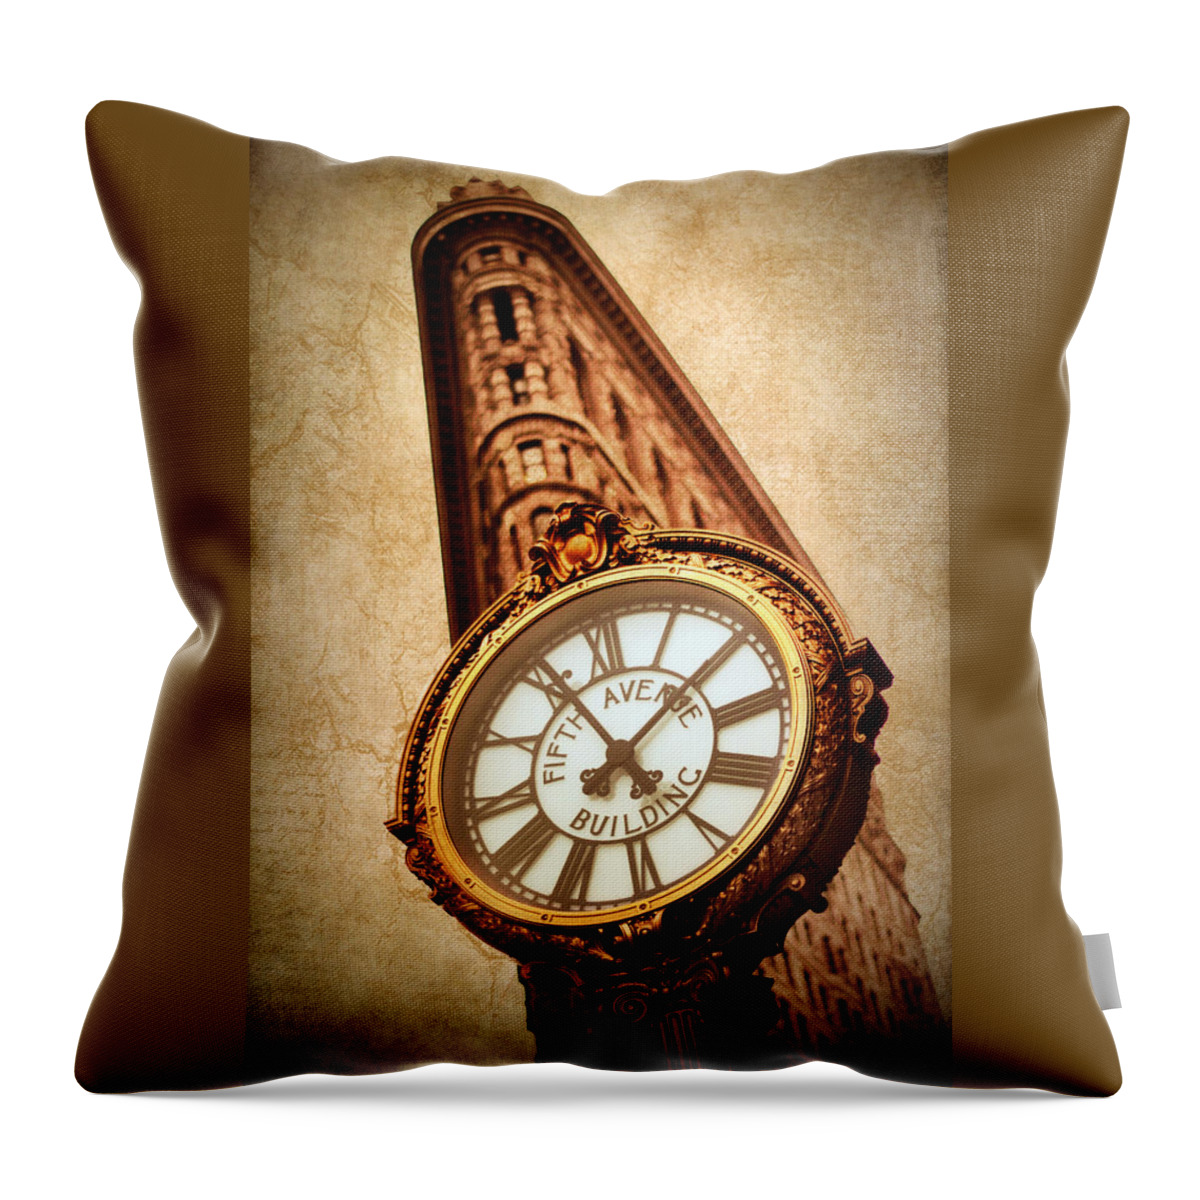 Building Throw Pillow featuring the photograph As Time Goes By by Jessica Jenney